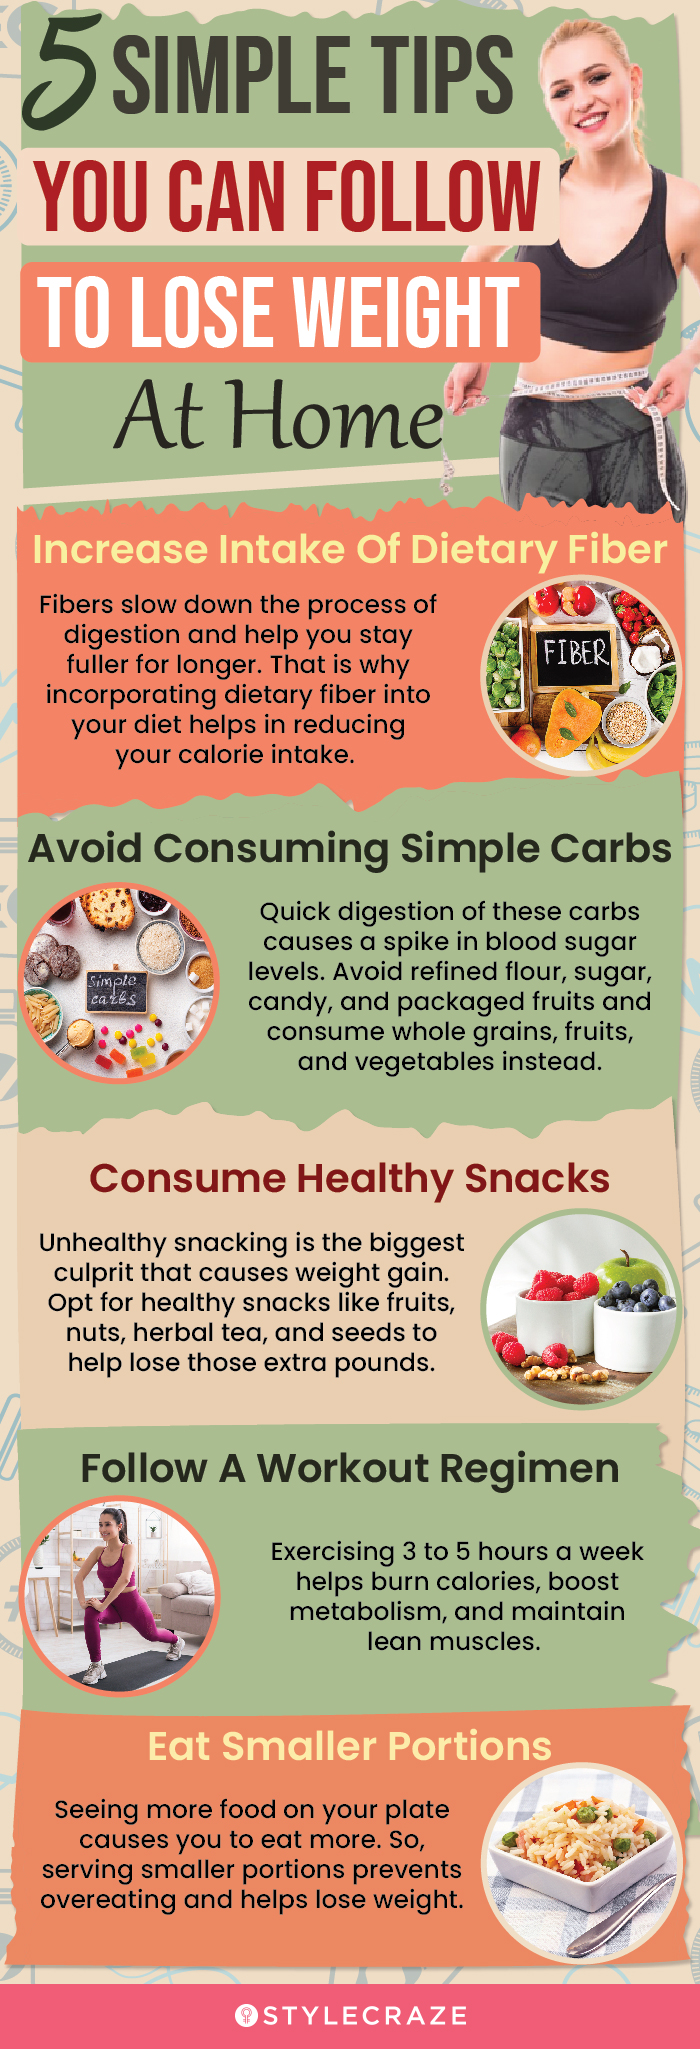 5 simple tips you can follow to lose weight at home (infographic)